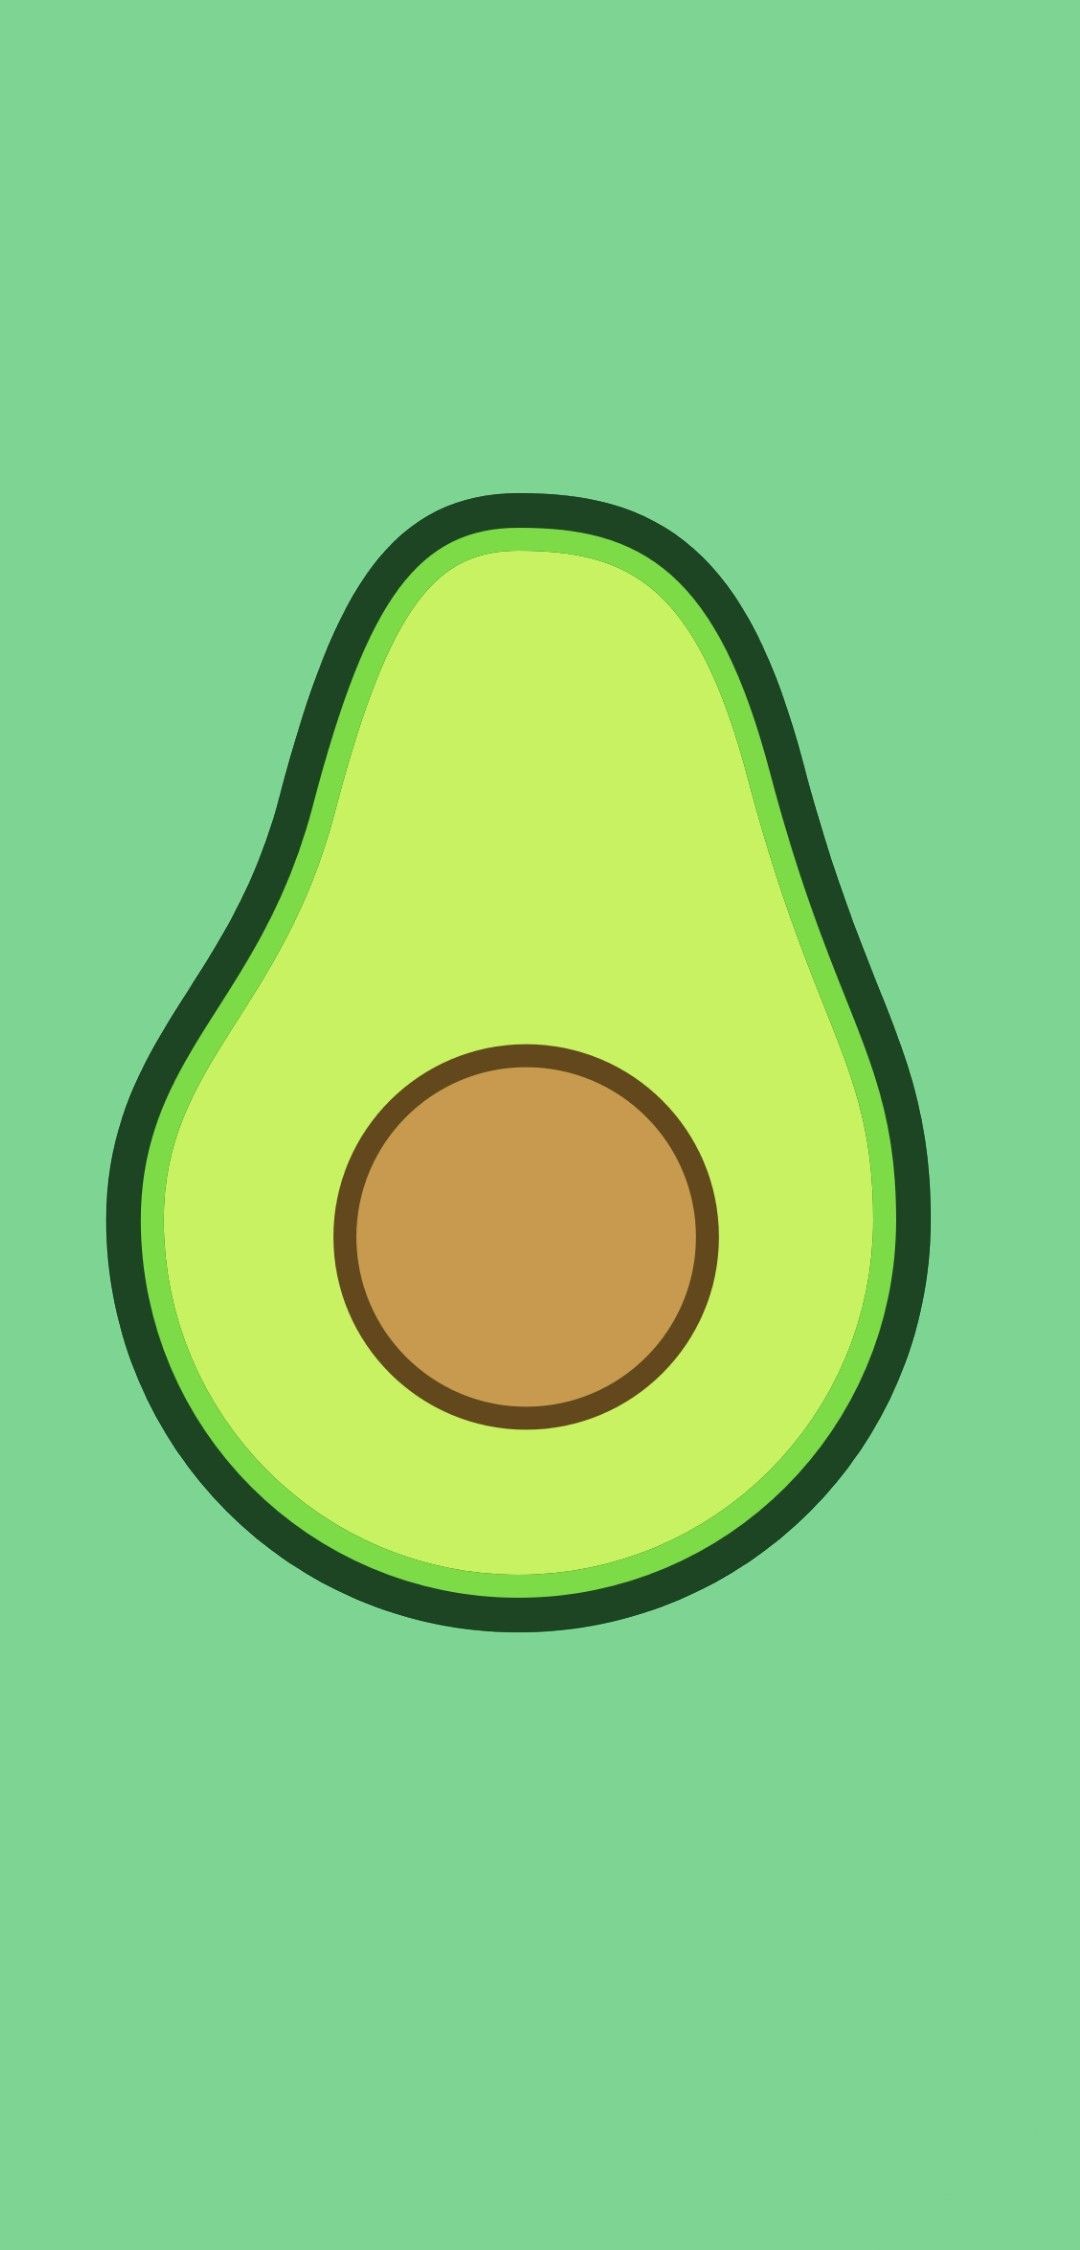 An illustration of a half of an avocado on a green background - Avocado